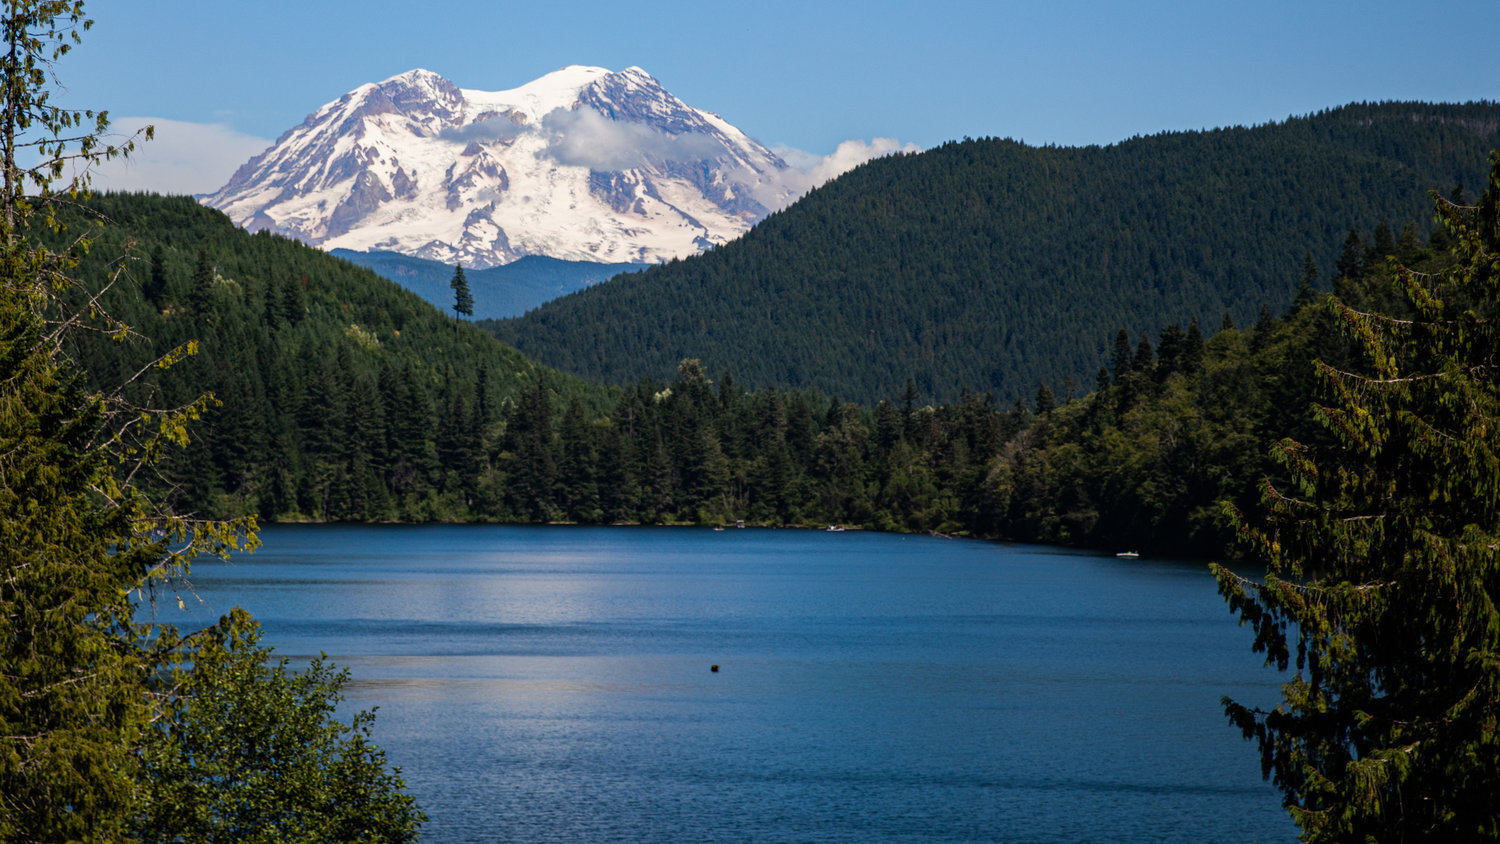 Mount Rainier towers above Mineral Lake, which is just below the Nisqually River in Northeast Lewis County. This photo was taken last August.